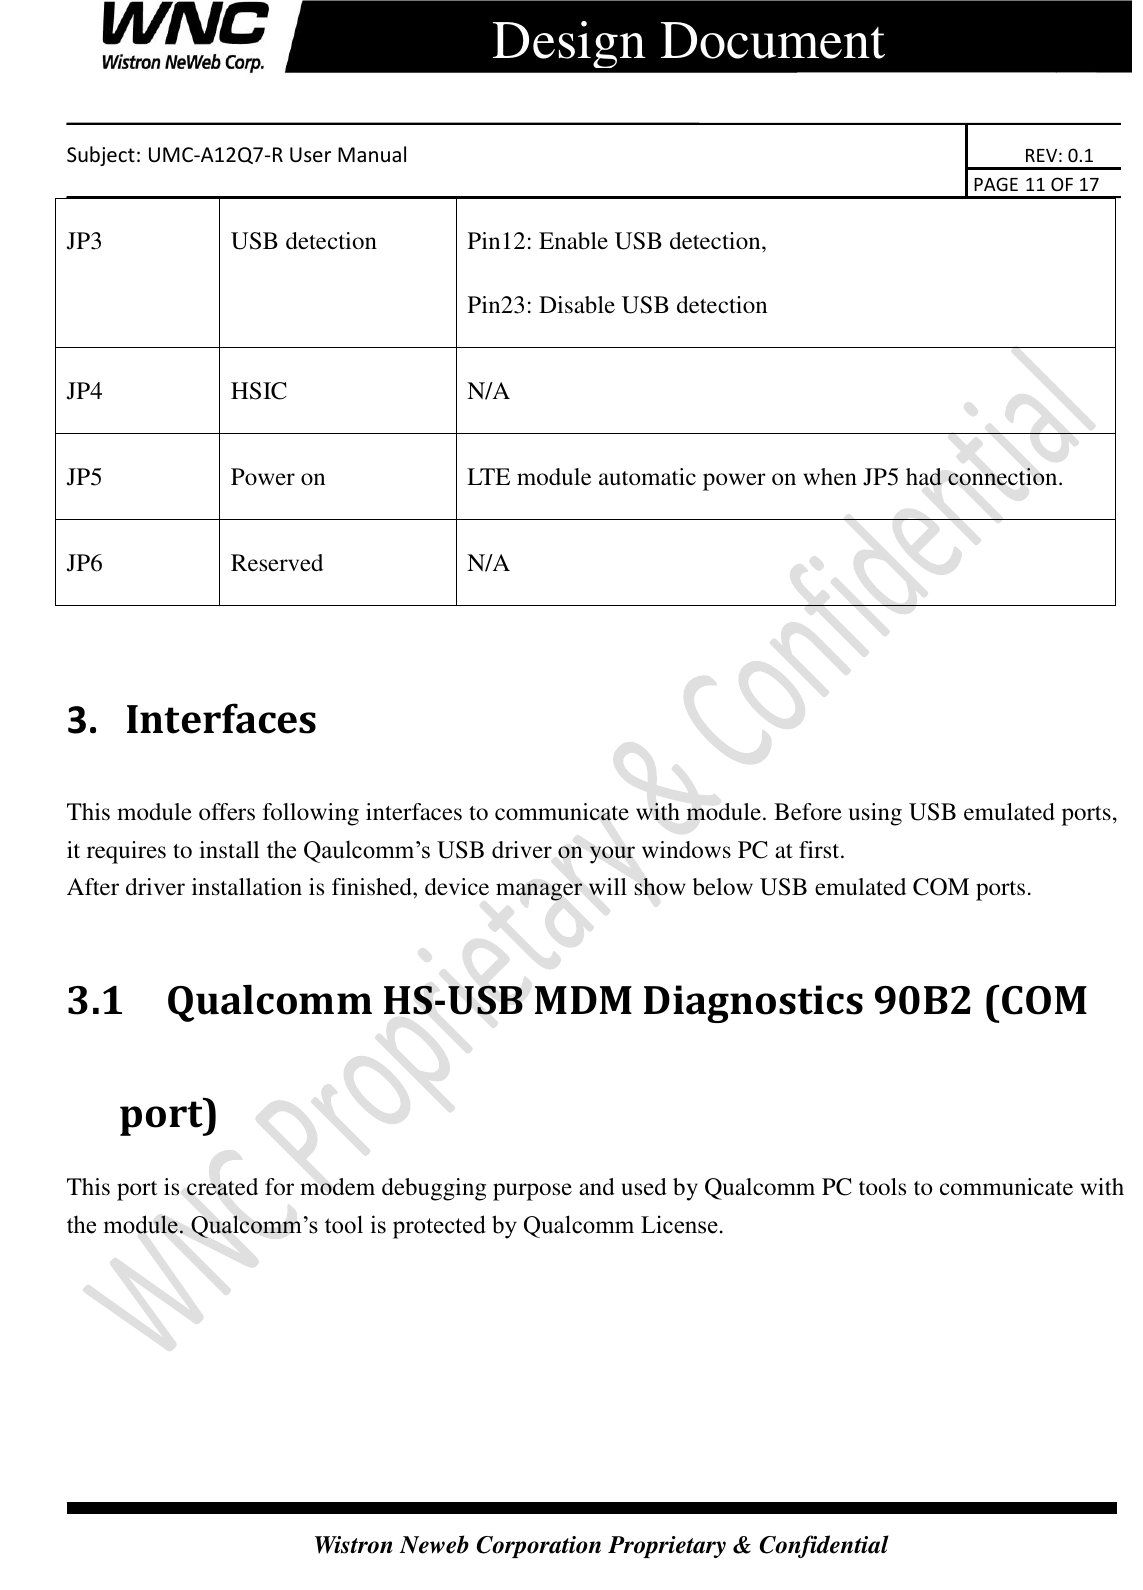    Subject: UMC-A12Q7-R User Manual                                                                      REV: 0.1                                                                                        PAGE 11 OF 17  Wistron Neweb Corporation Proprietary &amp; Confidential      Design Document JP3 USB detection Pin12: Enable USB detection,   Pin23: Disable USB detection JP4 HSIC N/A JP5 Power on LTE module automatic power on when JP5 had connection. JP6 Reserved N/A  3.   Interfaces This module offers following interfaces to communicate with module. Before using USB emulated ports, it requires to install the Qaulcomm’s USB driver on your windows PC at first. After driver installation is finished, device manager will show below USB emulated COM ports.  3.1 Qualcomm HS-USB MDM Diagnostics 90B2 (COM port) This port is created for modem debugging purpose and used by Qualcomm PC tools to communicate with the module. Qualcomm’s tool is protected by Qualcomm License. 